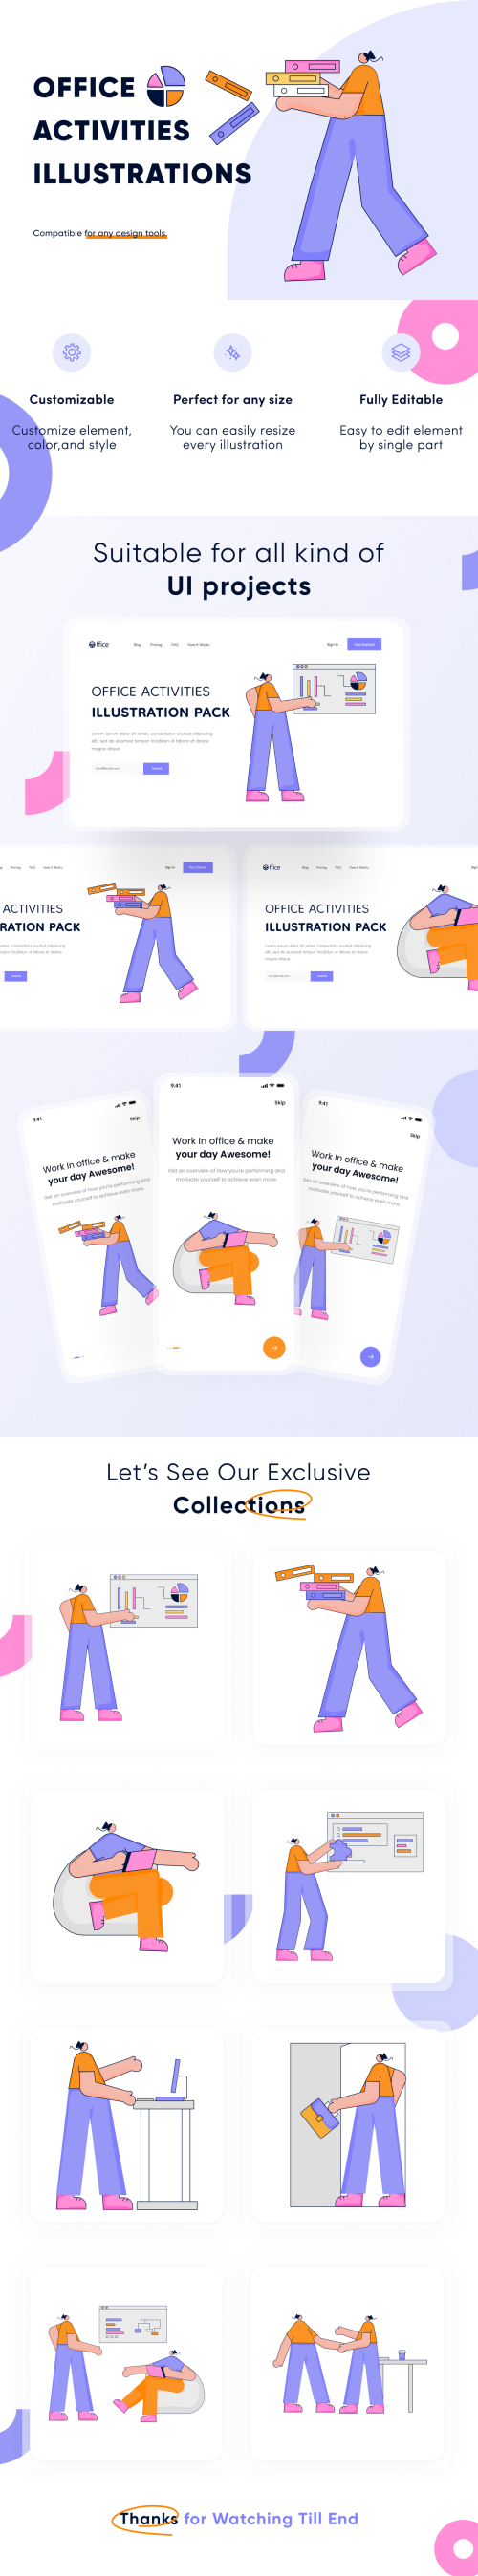 UIHut - Office Activity Illustration Pack for UI Projects - 22257